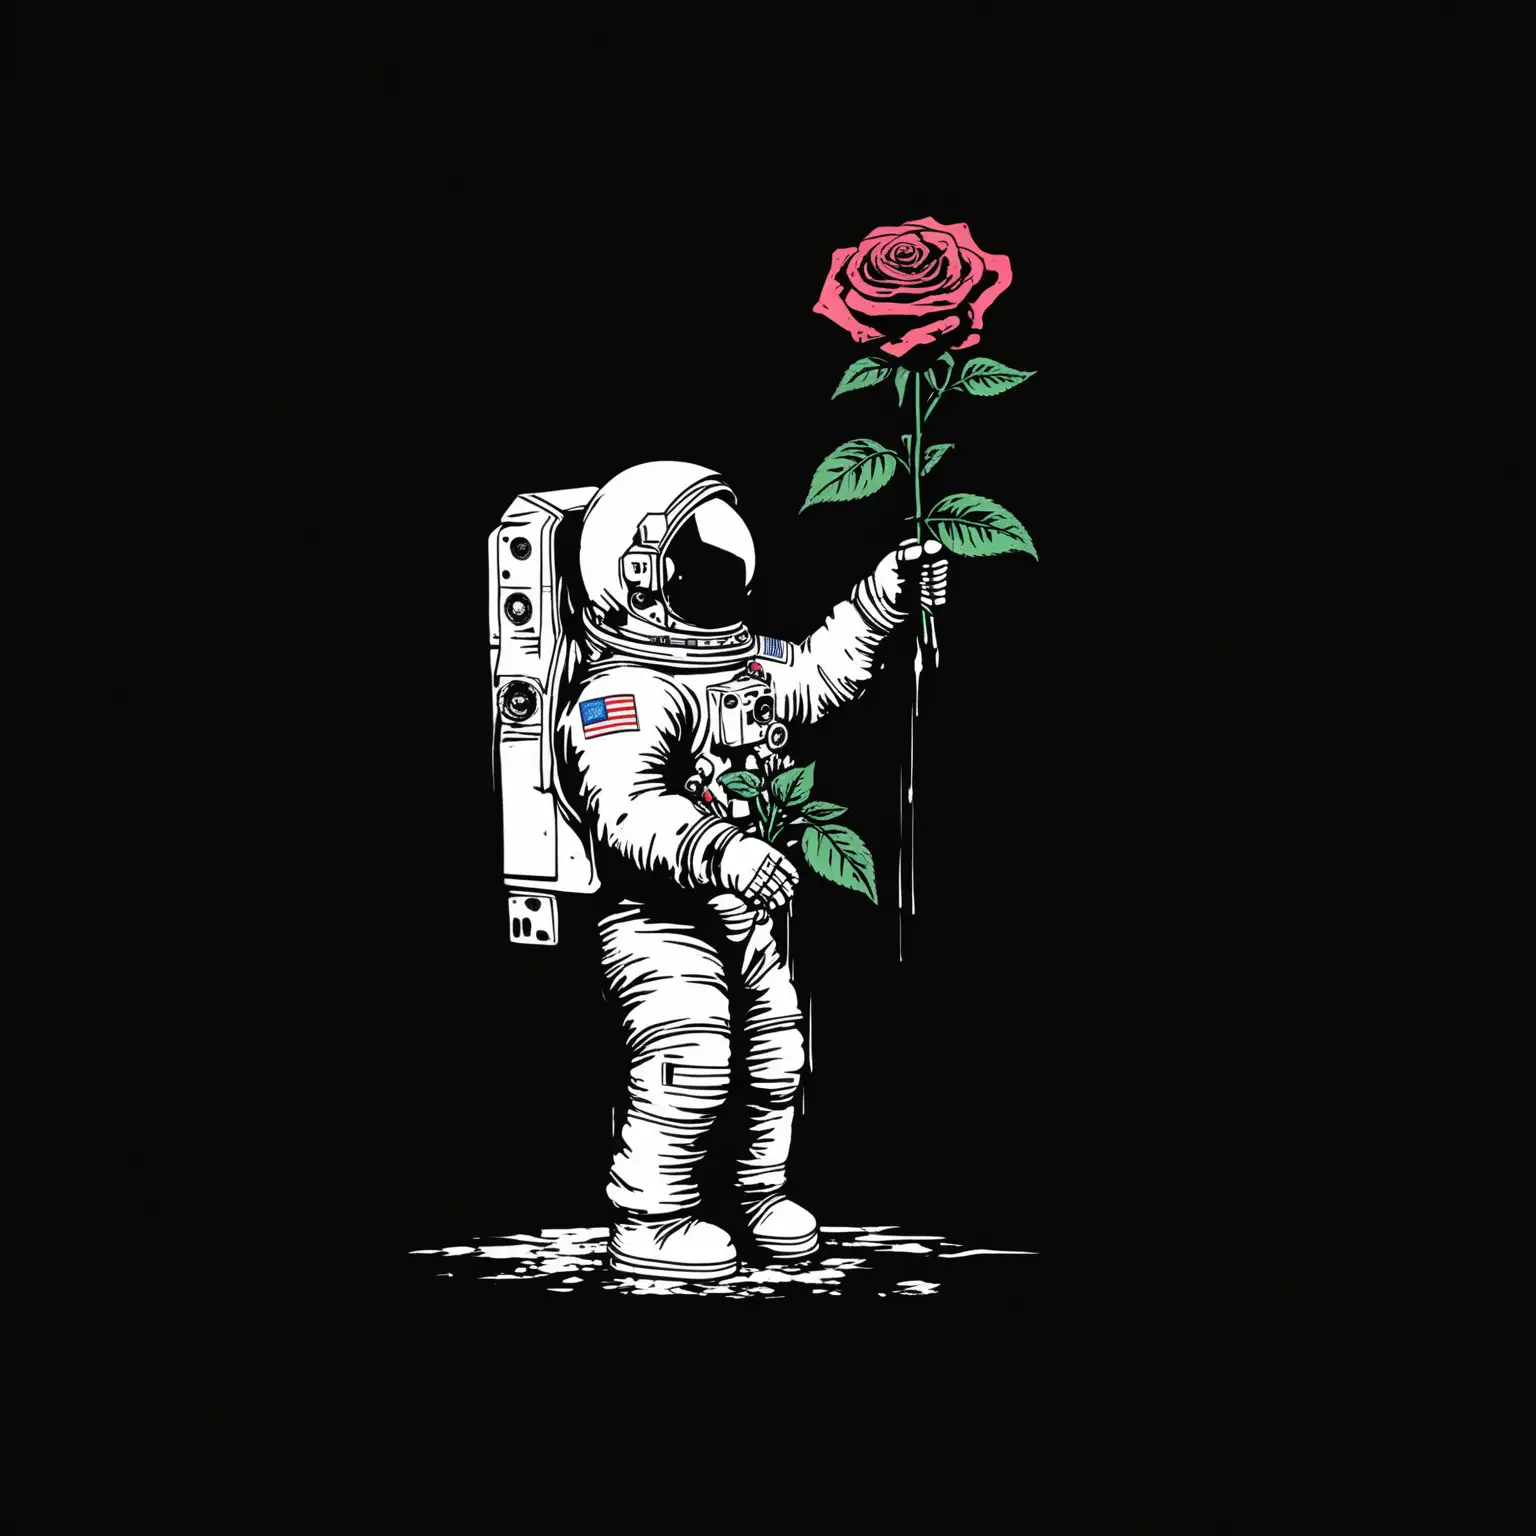 Banksy Style Street Art Astronaut Holding a Rose on Black Background